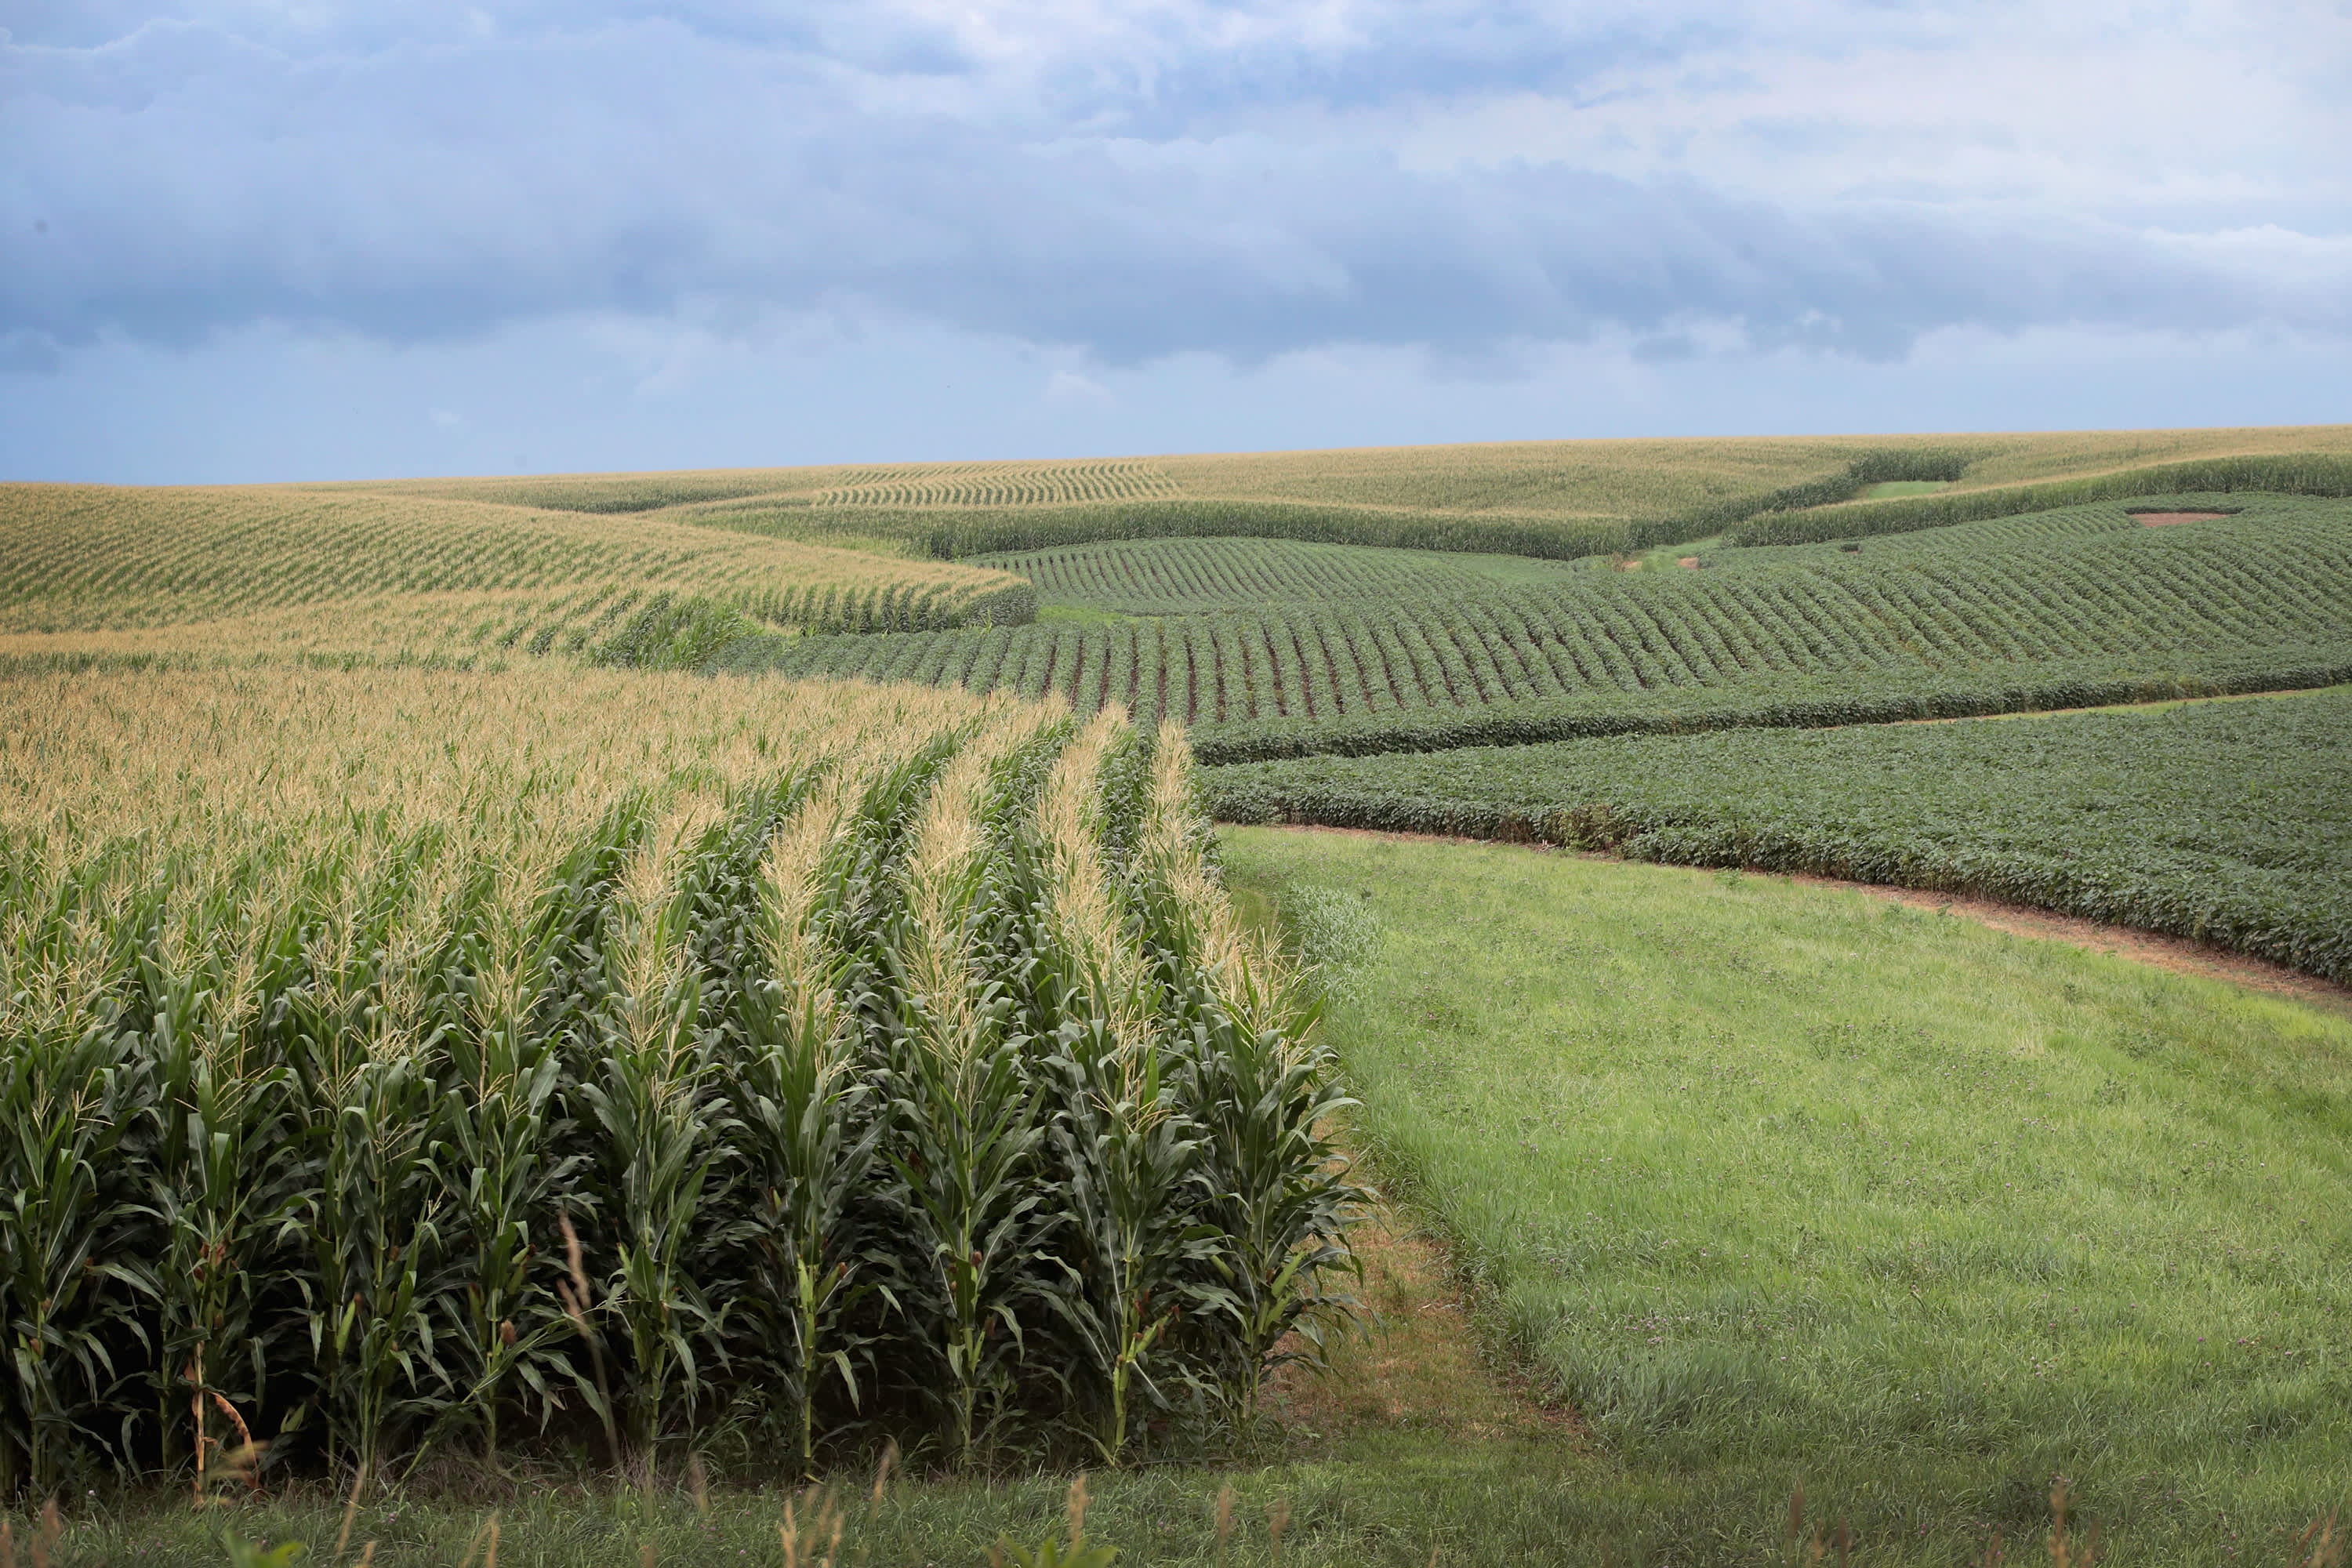 Farmland prices stable despite facing pressure and potential risks, says KC Fed survey